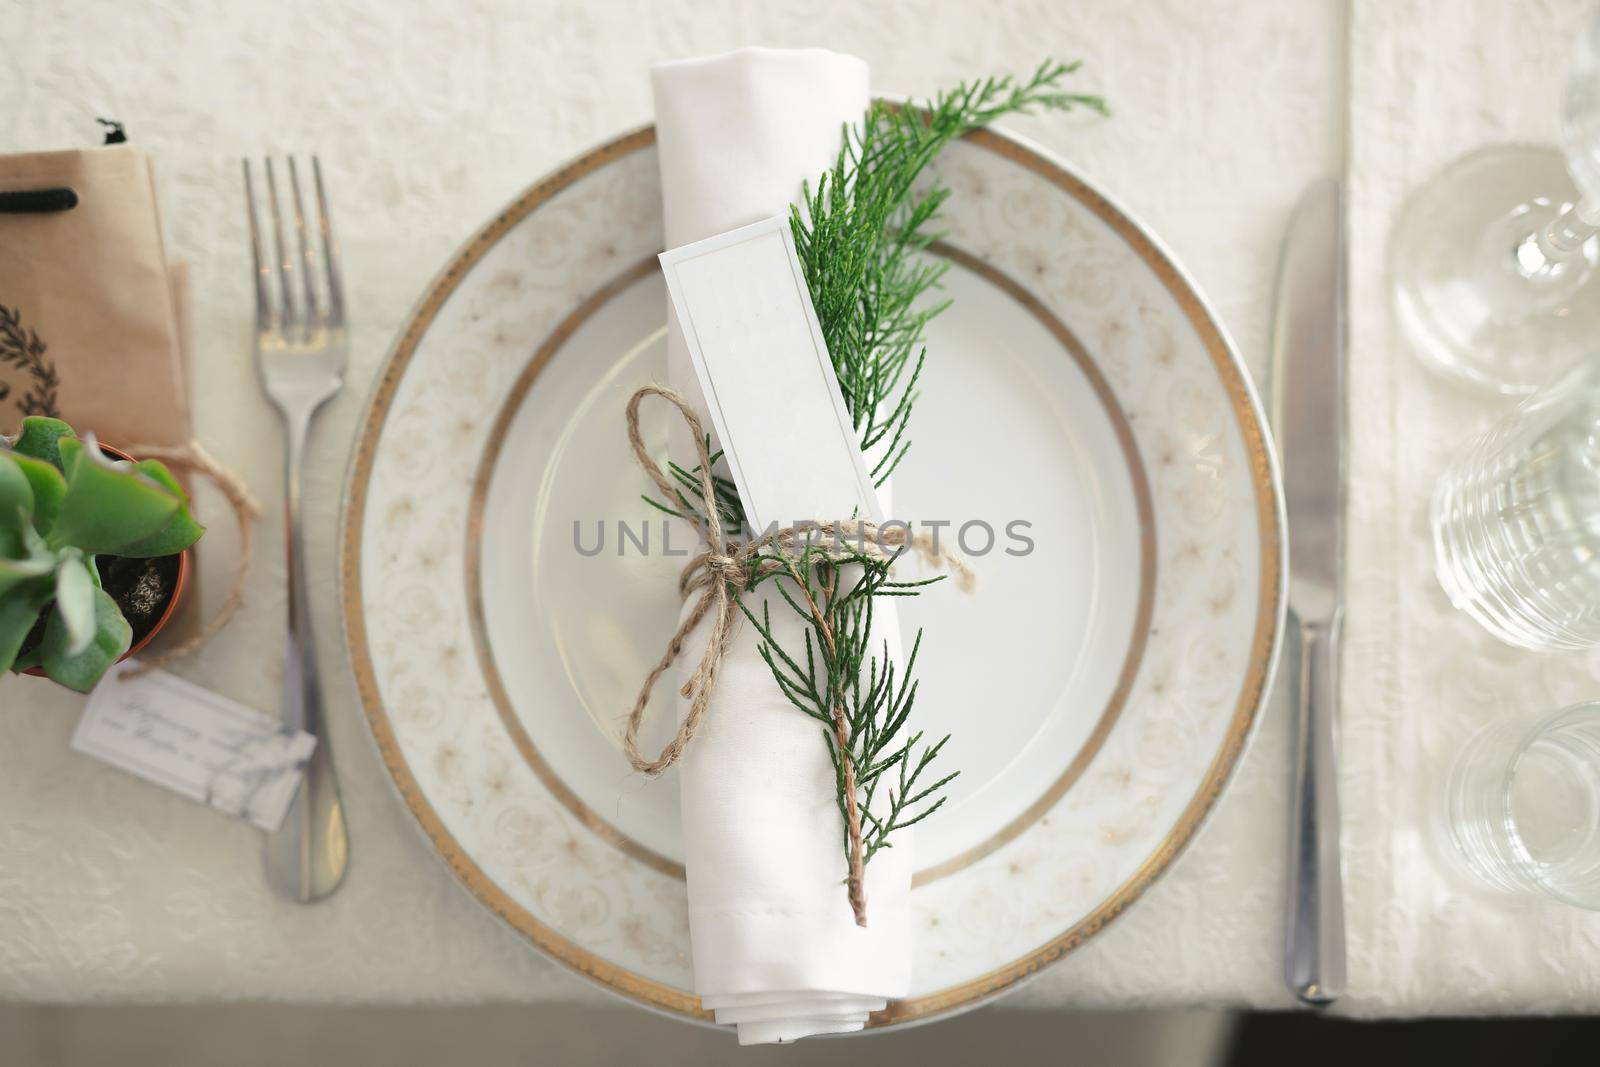 Serving a wedding banquet. A plate with a napkin and a sprig of juniper.